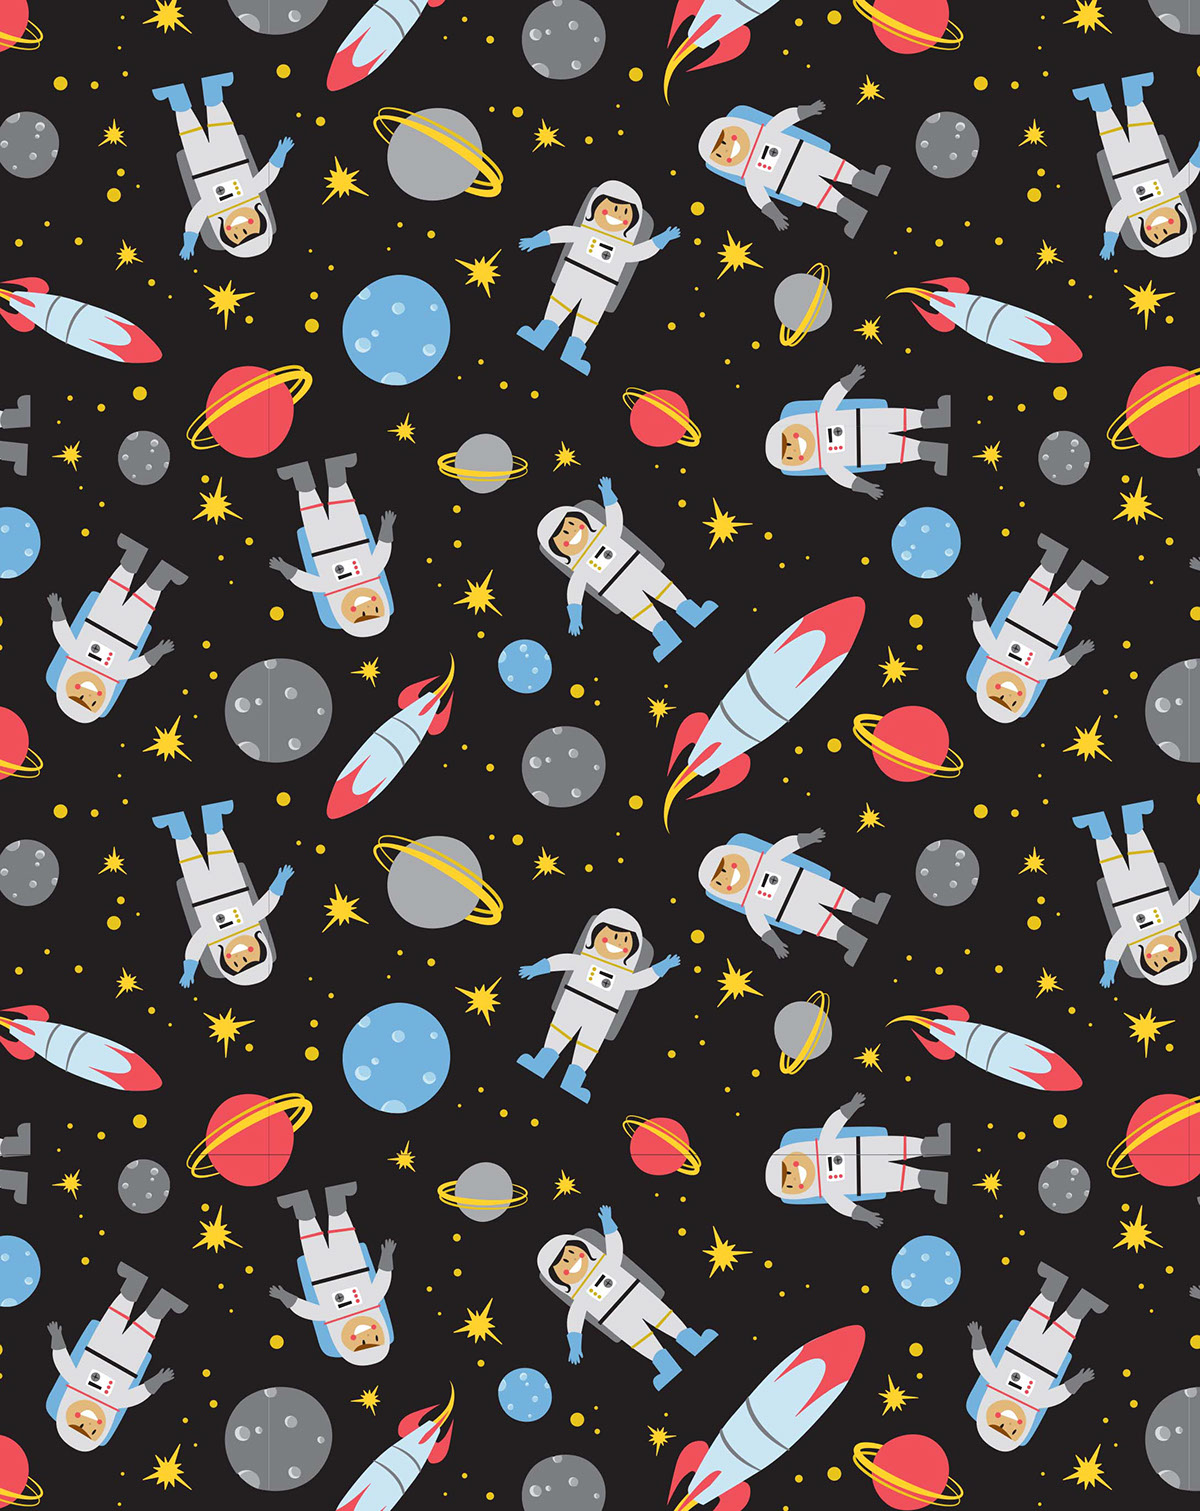 Retro space age Textiles pattern mock up atomic age flat graphic